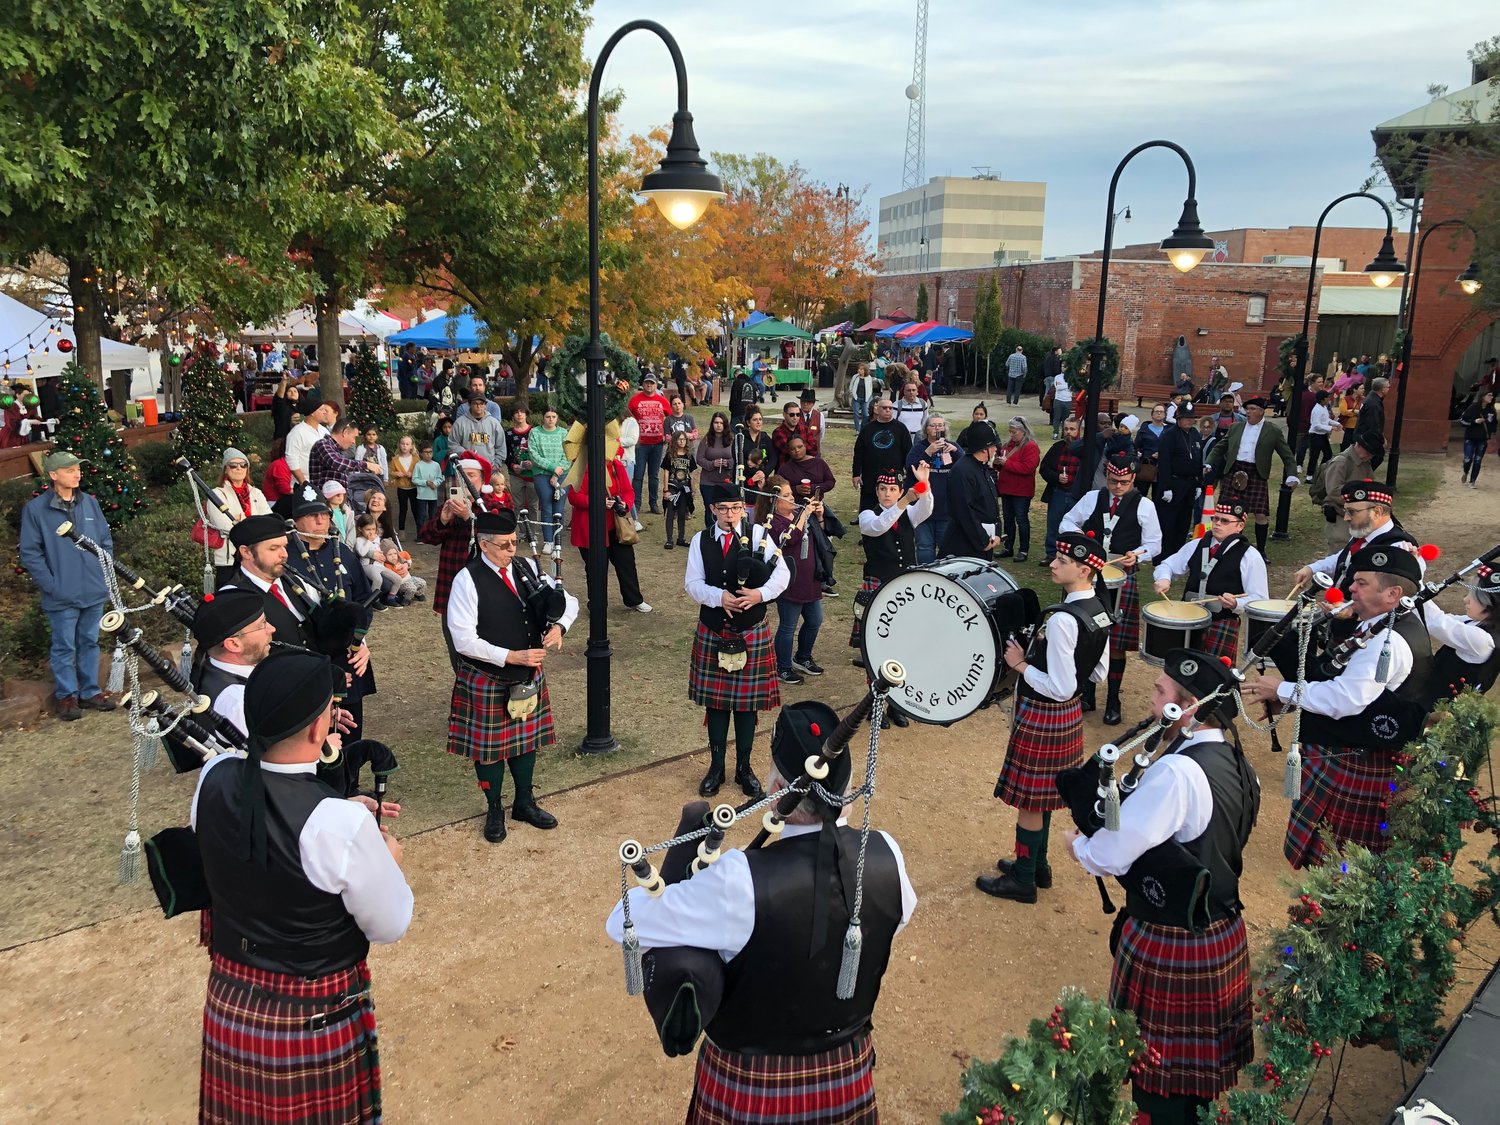 Queen Victoria was quite fond of the Scots, so it was most fitting that the Cross Creek Pipes and Drums performed for her. They include eight pipers and six drummers.